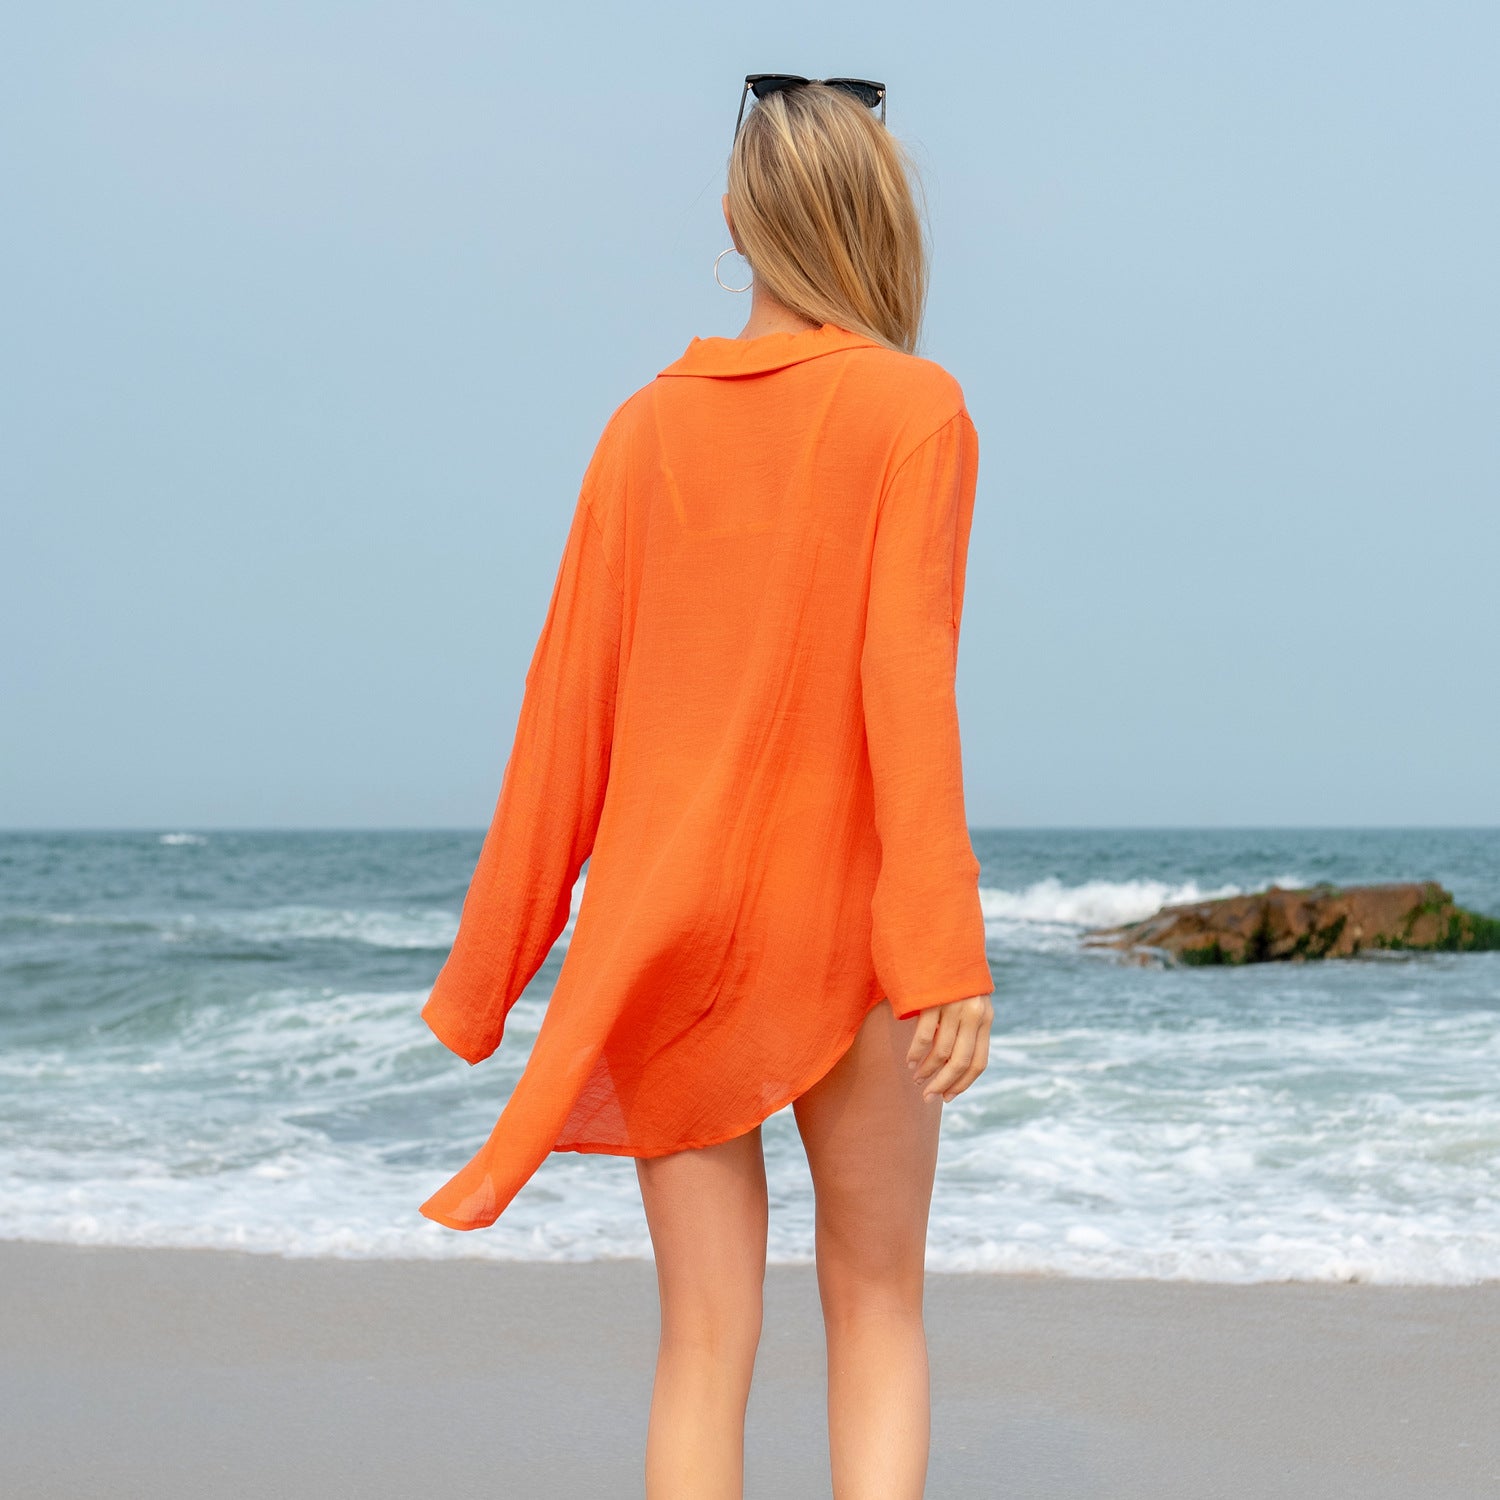 Seaside Sun Protection Clothing Beach Cover Up Quick Drying Women Beach Solid Color V neck Shirt